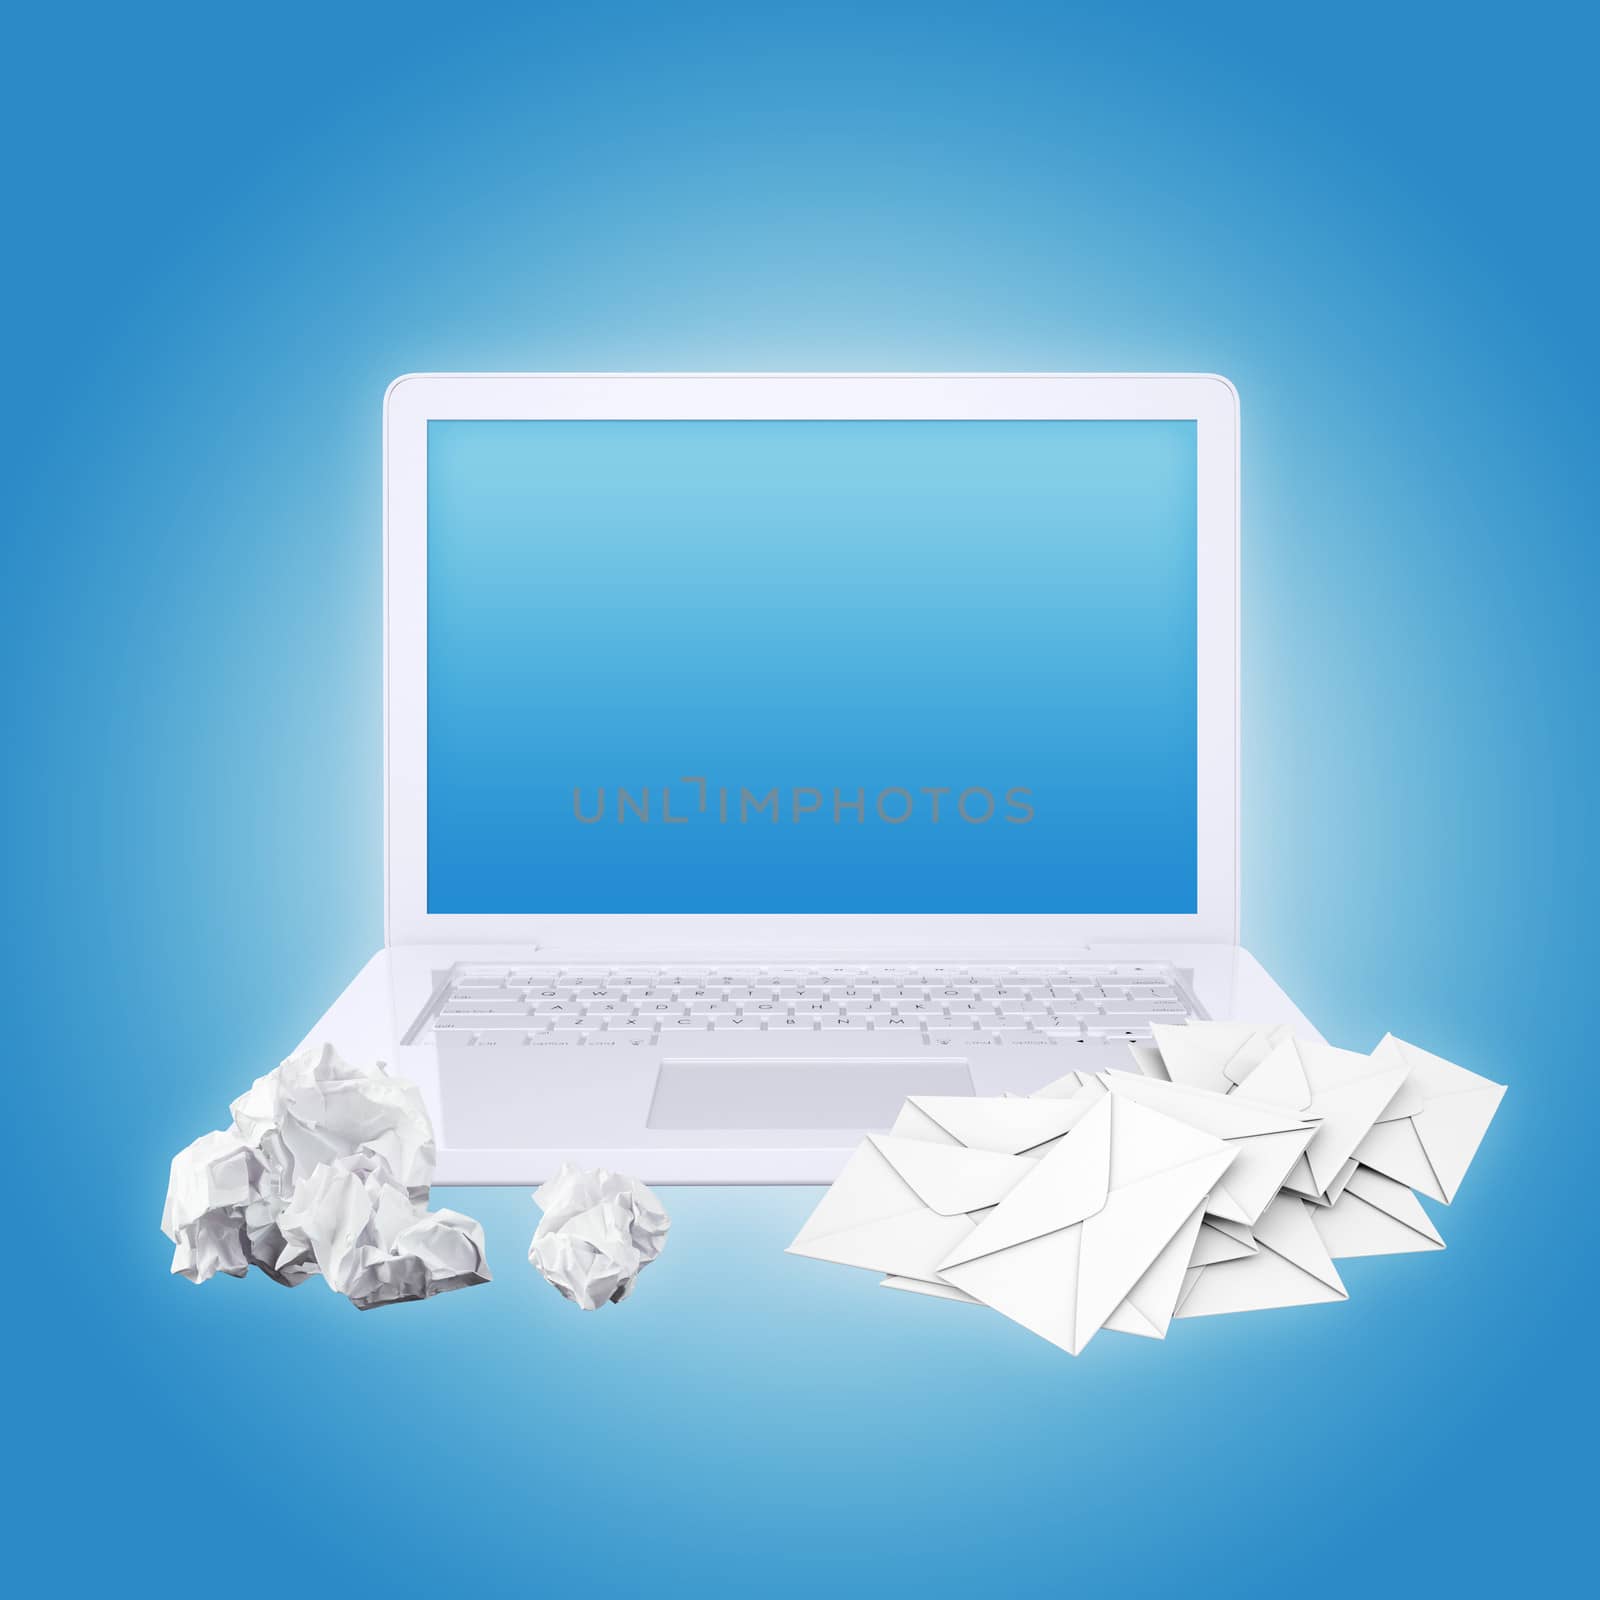 Laptop crumpled paper and envelopes by cherezoff